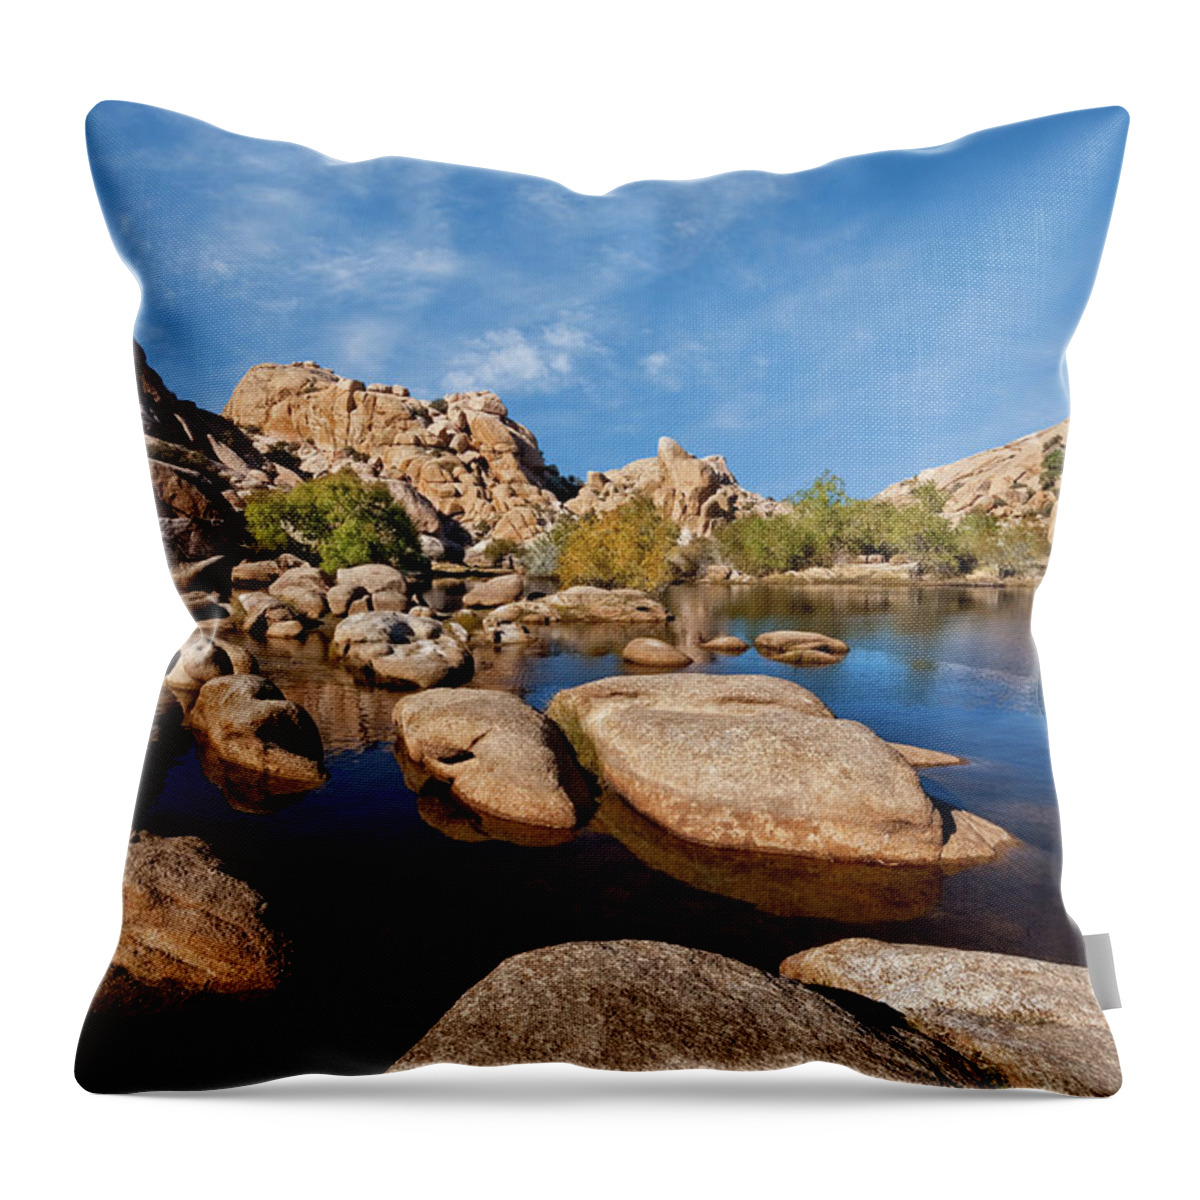 Arid Climate Throw Pillow featuring the photograph Mojave Desert Oasis by Jeff Goulden